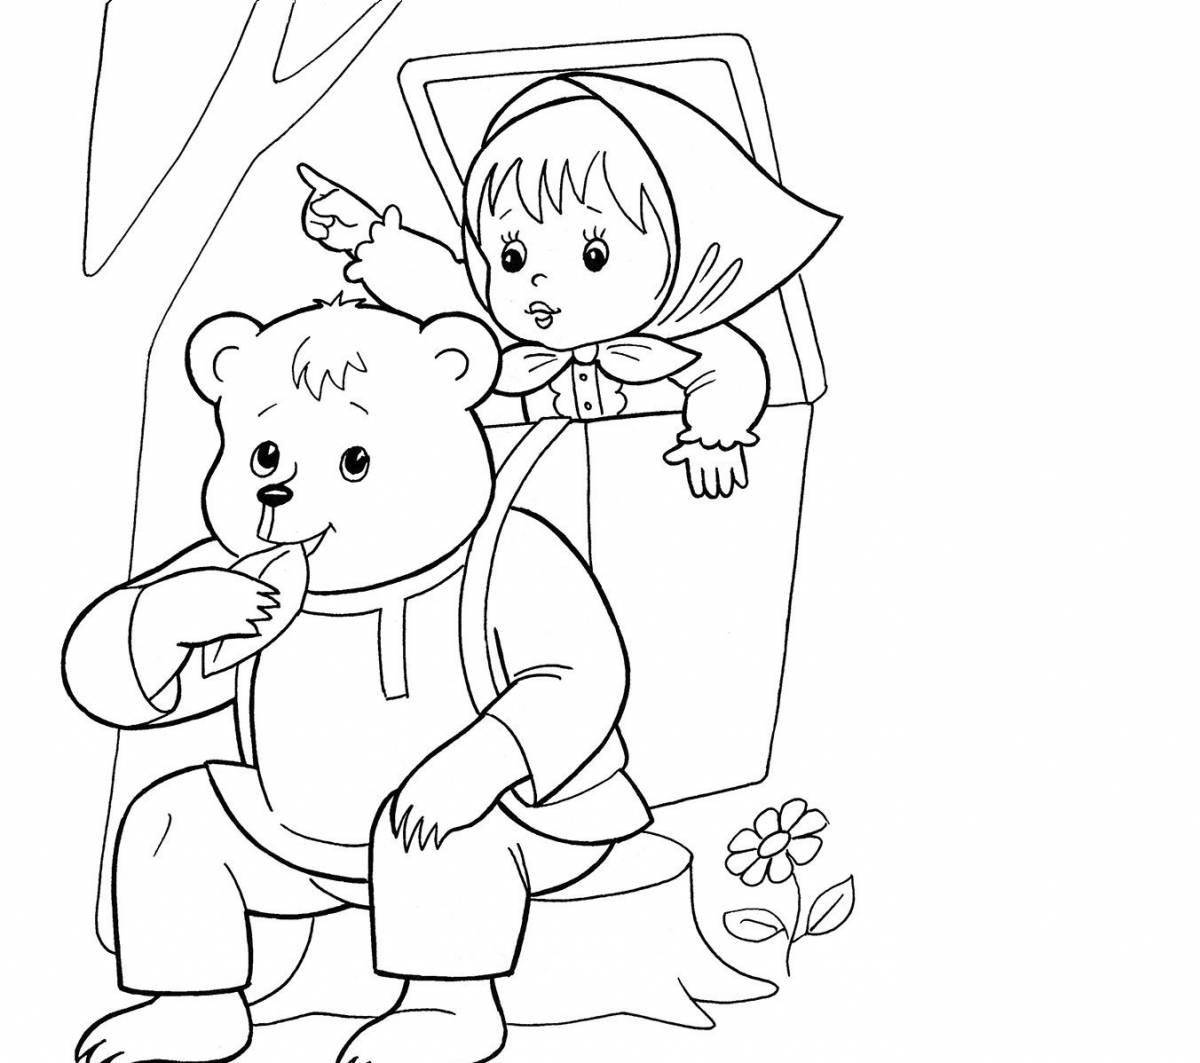 Amazing Masha and the bear coloring book